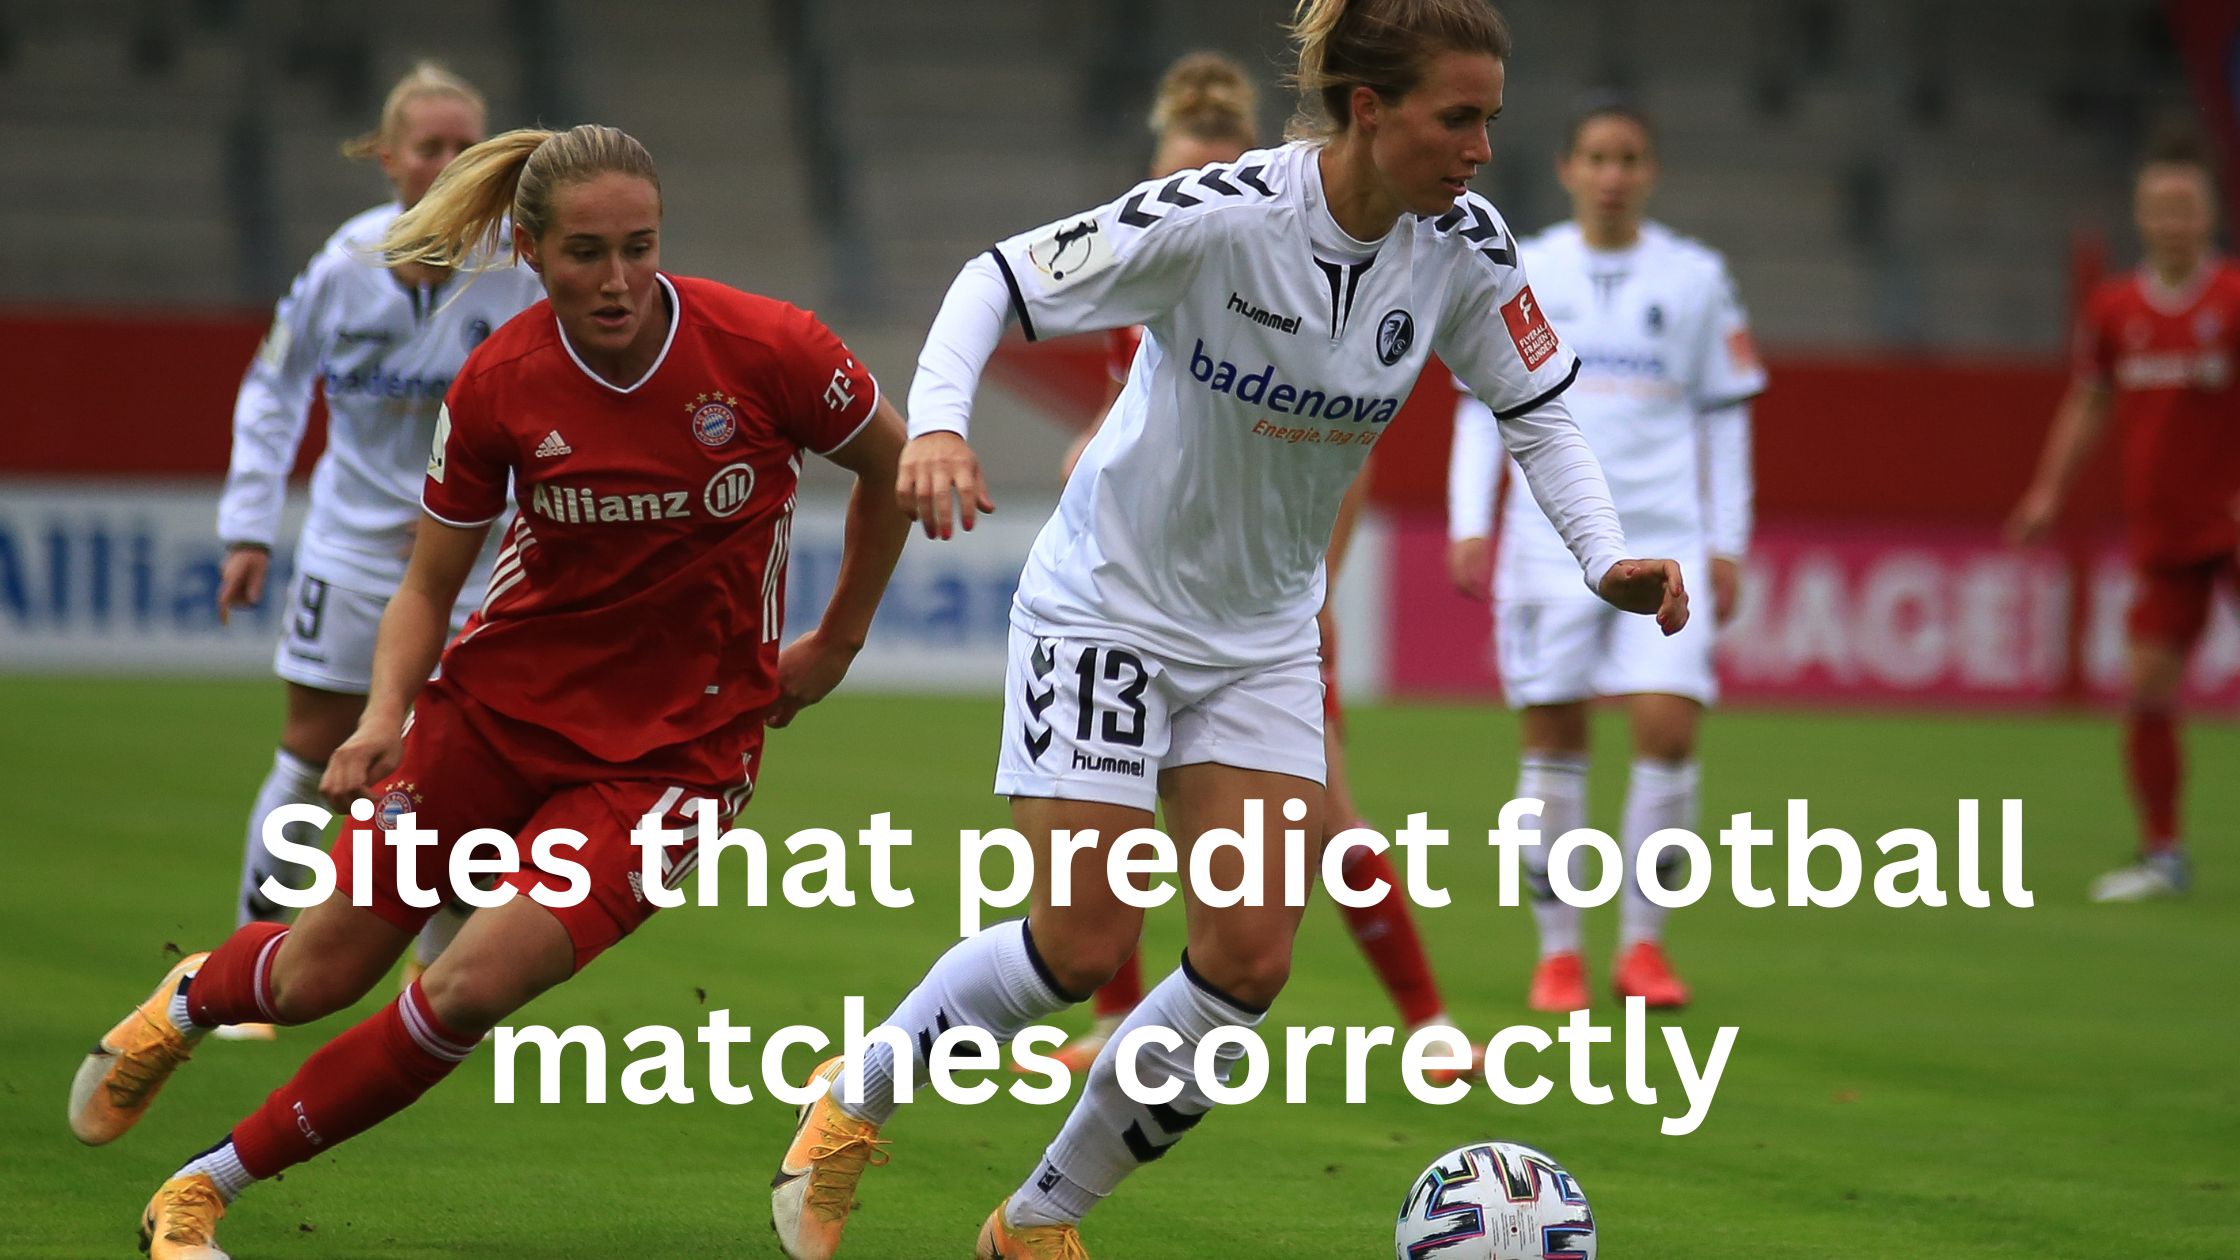 site that predict football matches correctly